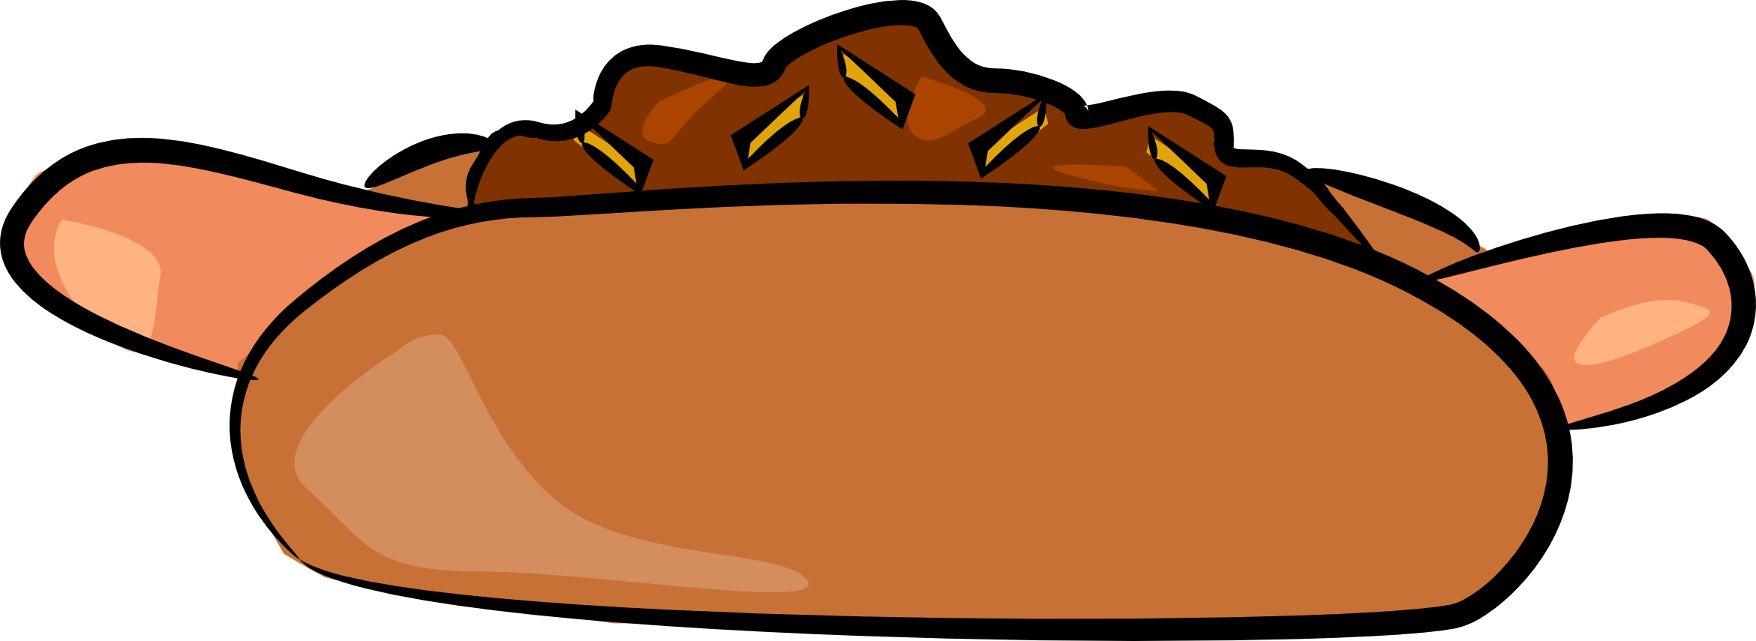 Chili To Use Image Clipart Clipart